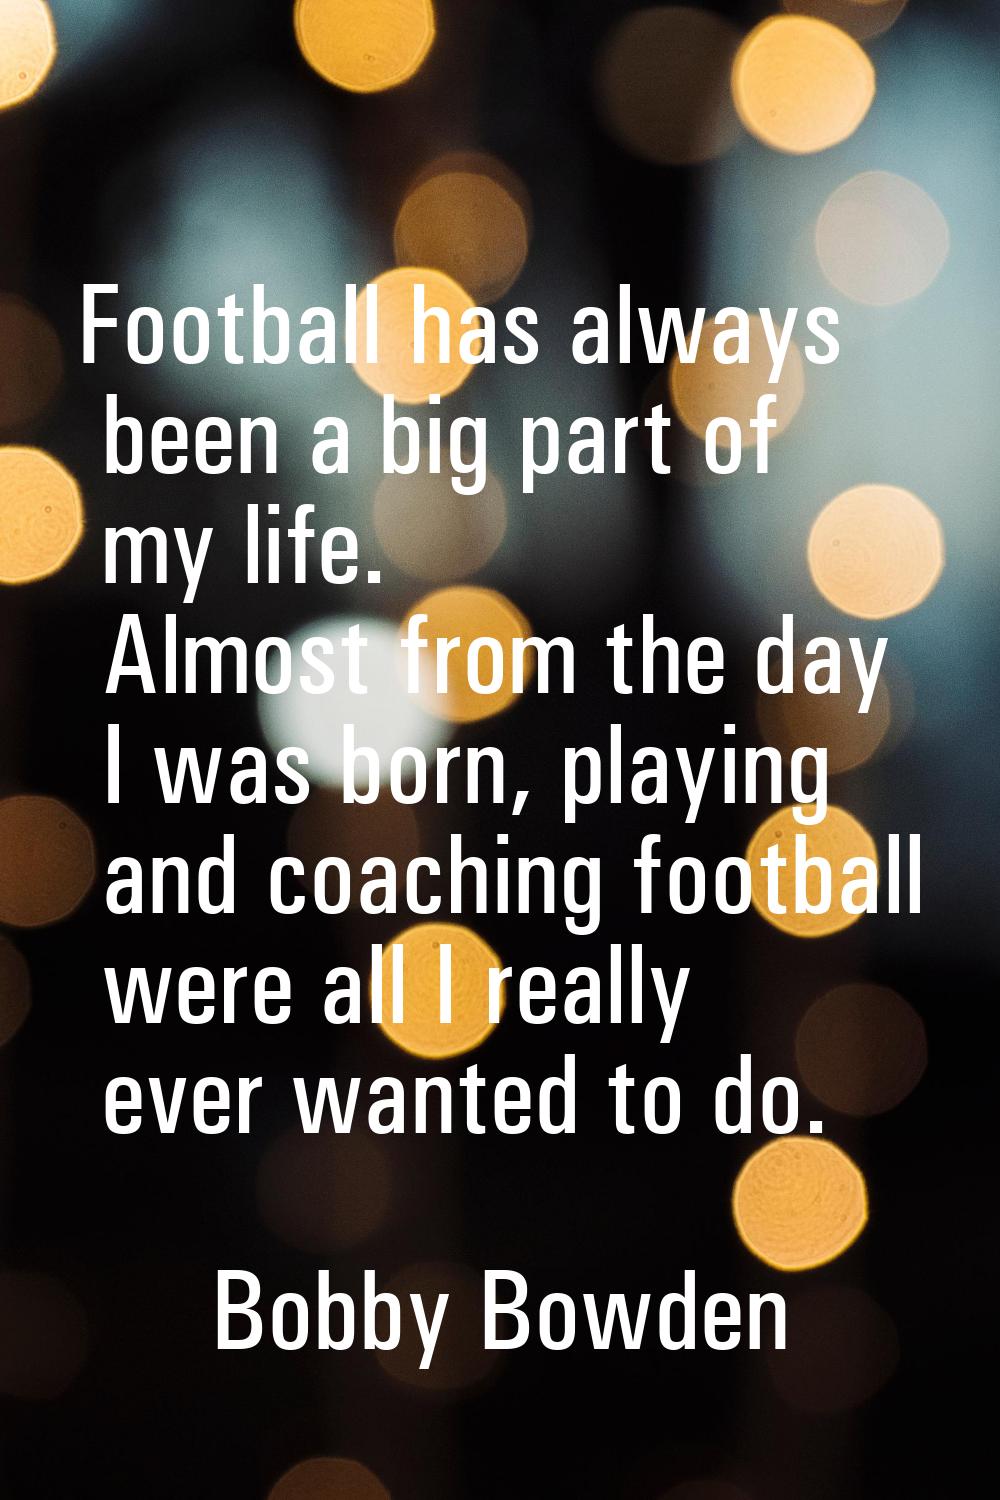 Football has always been a big part of my life. Almost from the day I was born, playing and coachin